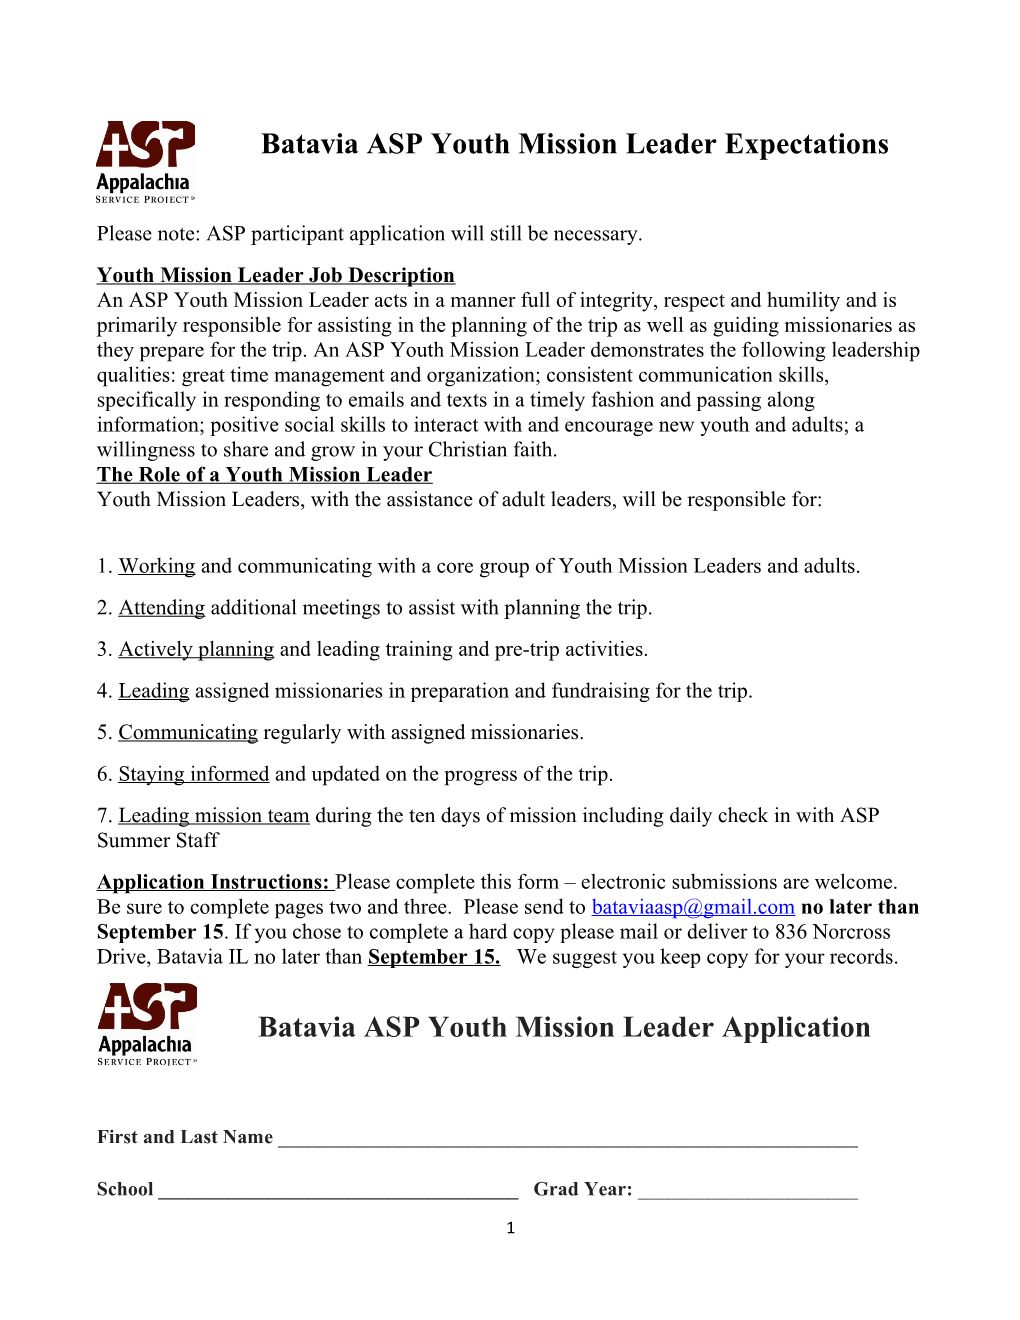 Please Note: ASP Participant Application Will Still Be Necessary